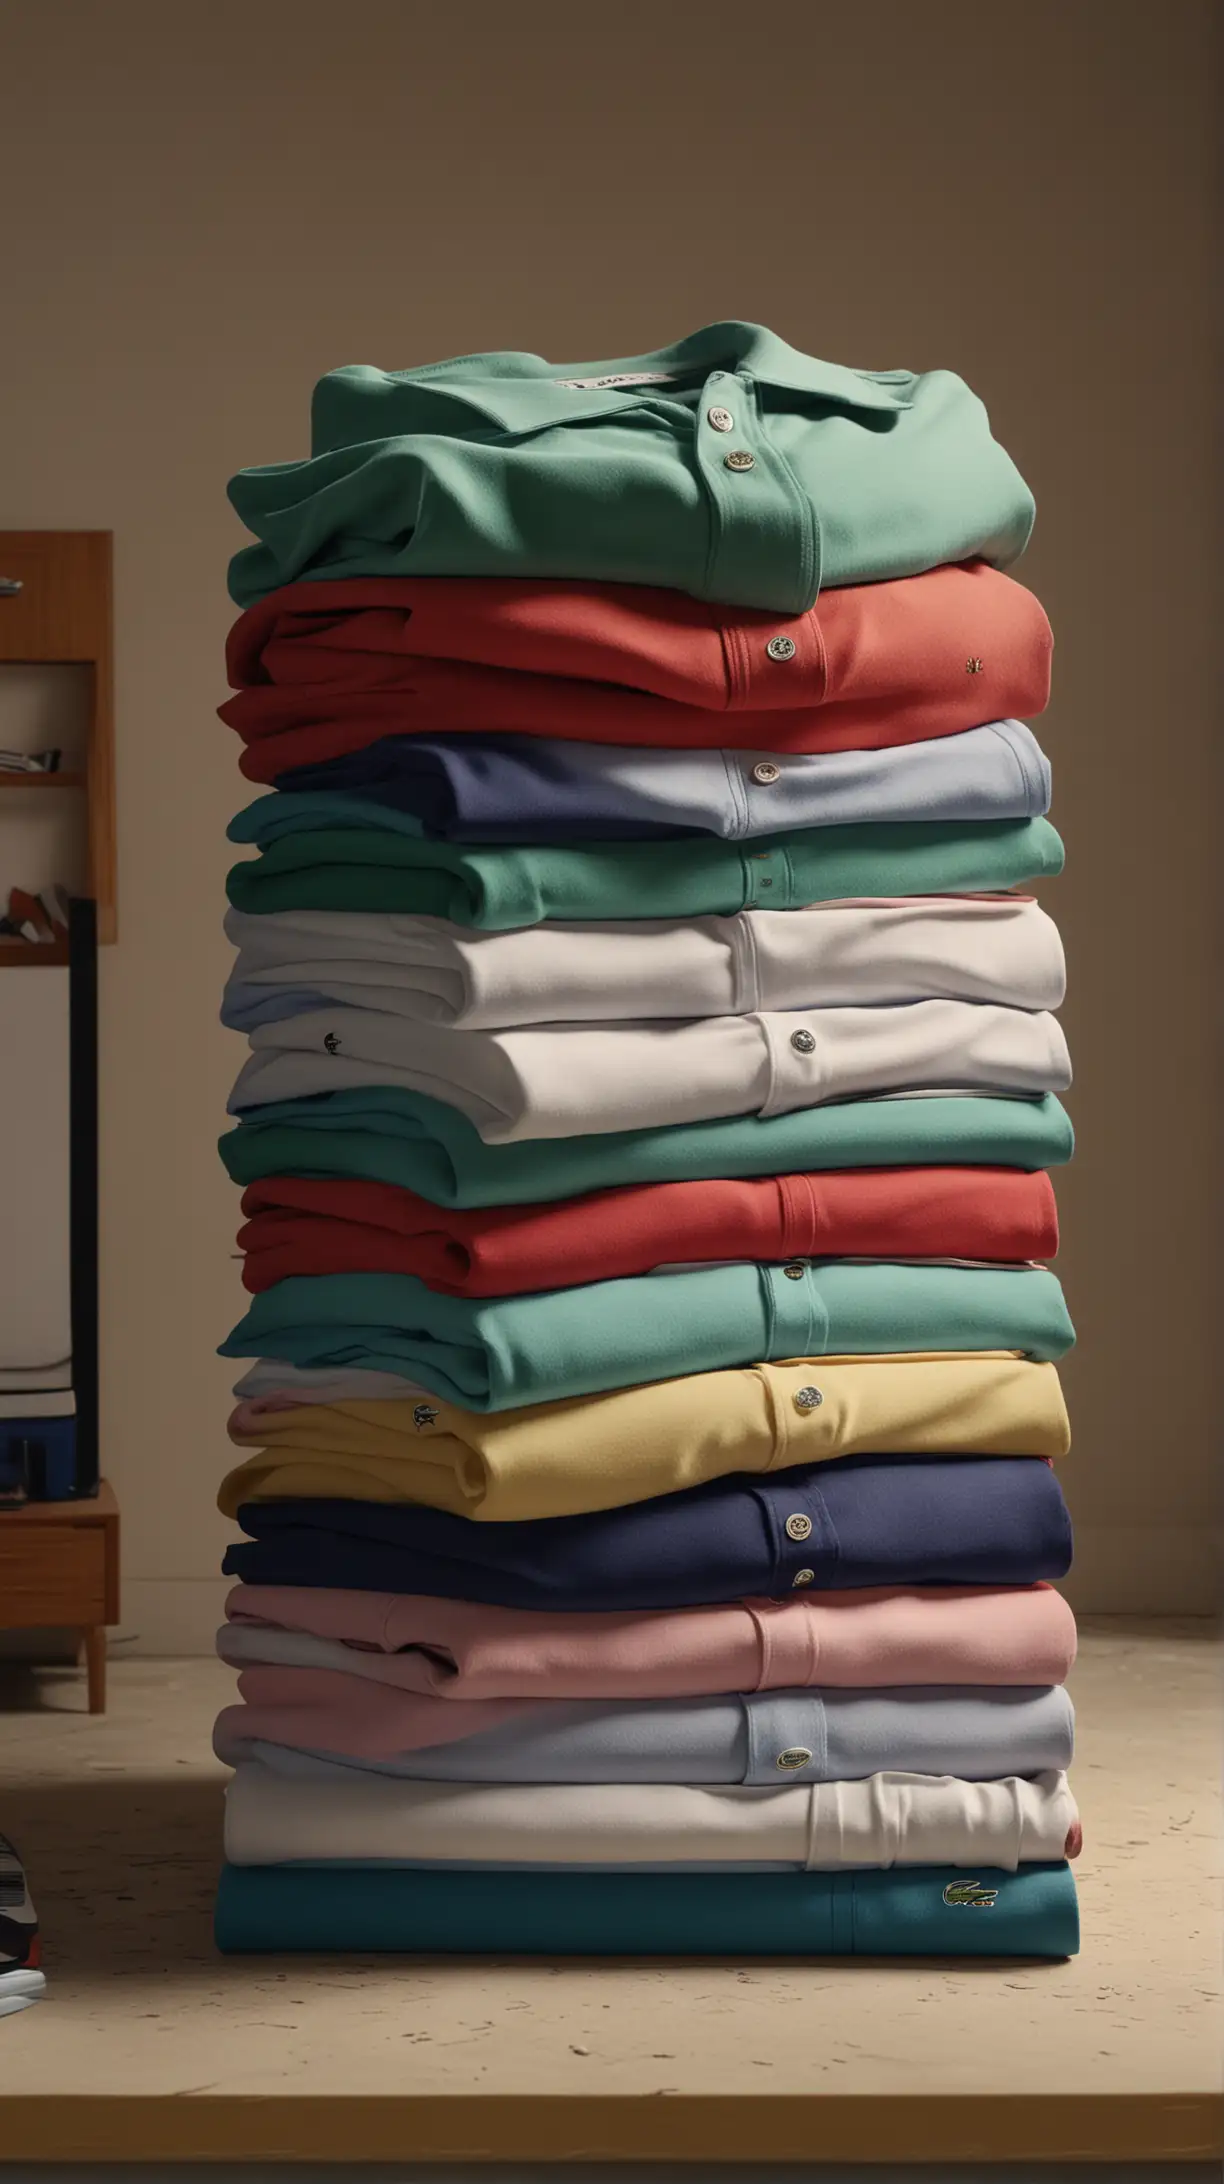 Colorful Lacoste Polo Shirts Arranged in Egyptian Modern House Setting